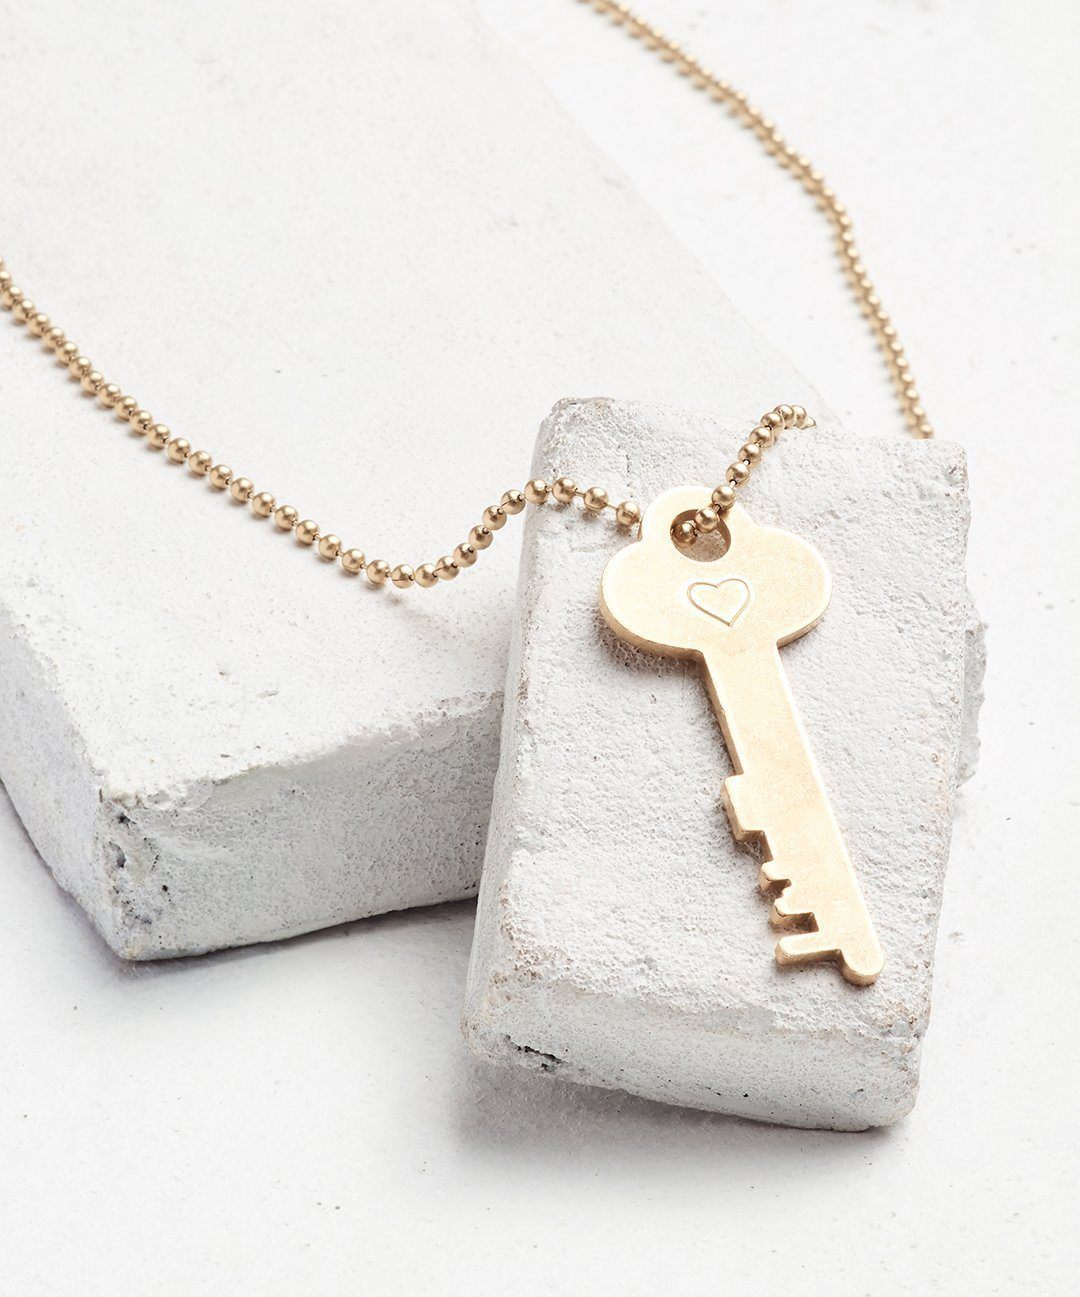 Symbol Classic Ball Chain Key Necklace Necklaces The Giving Keys 